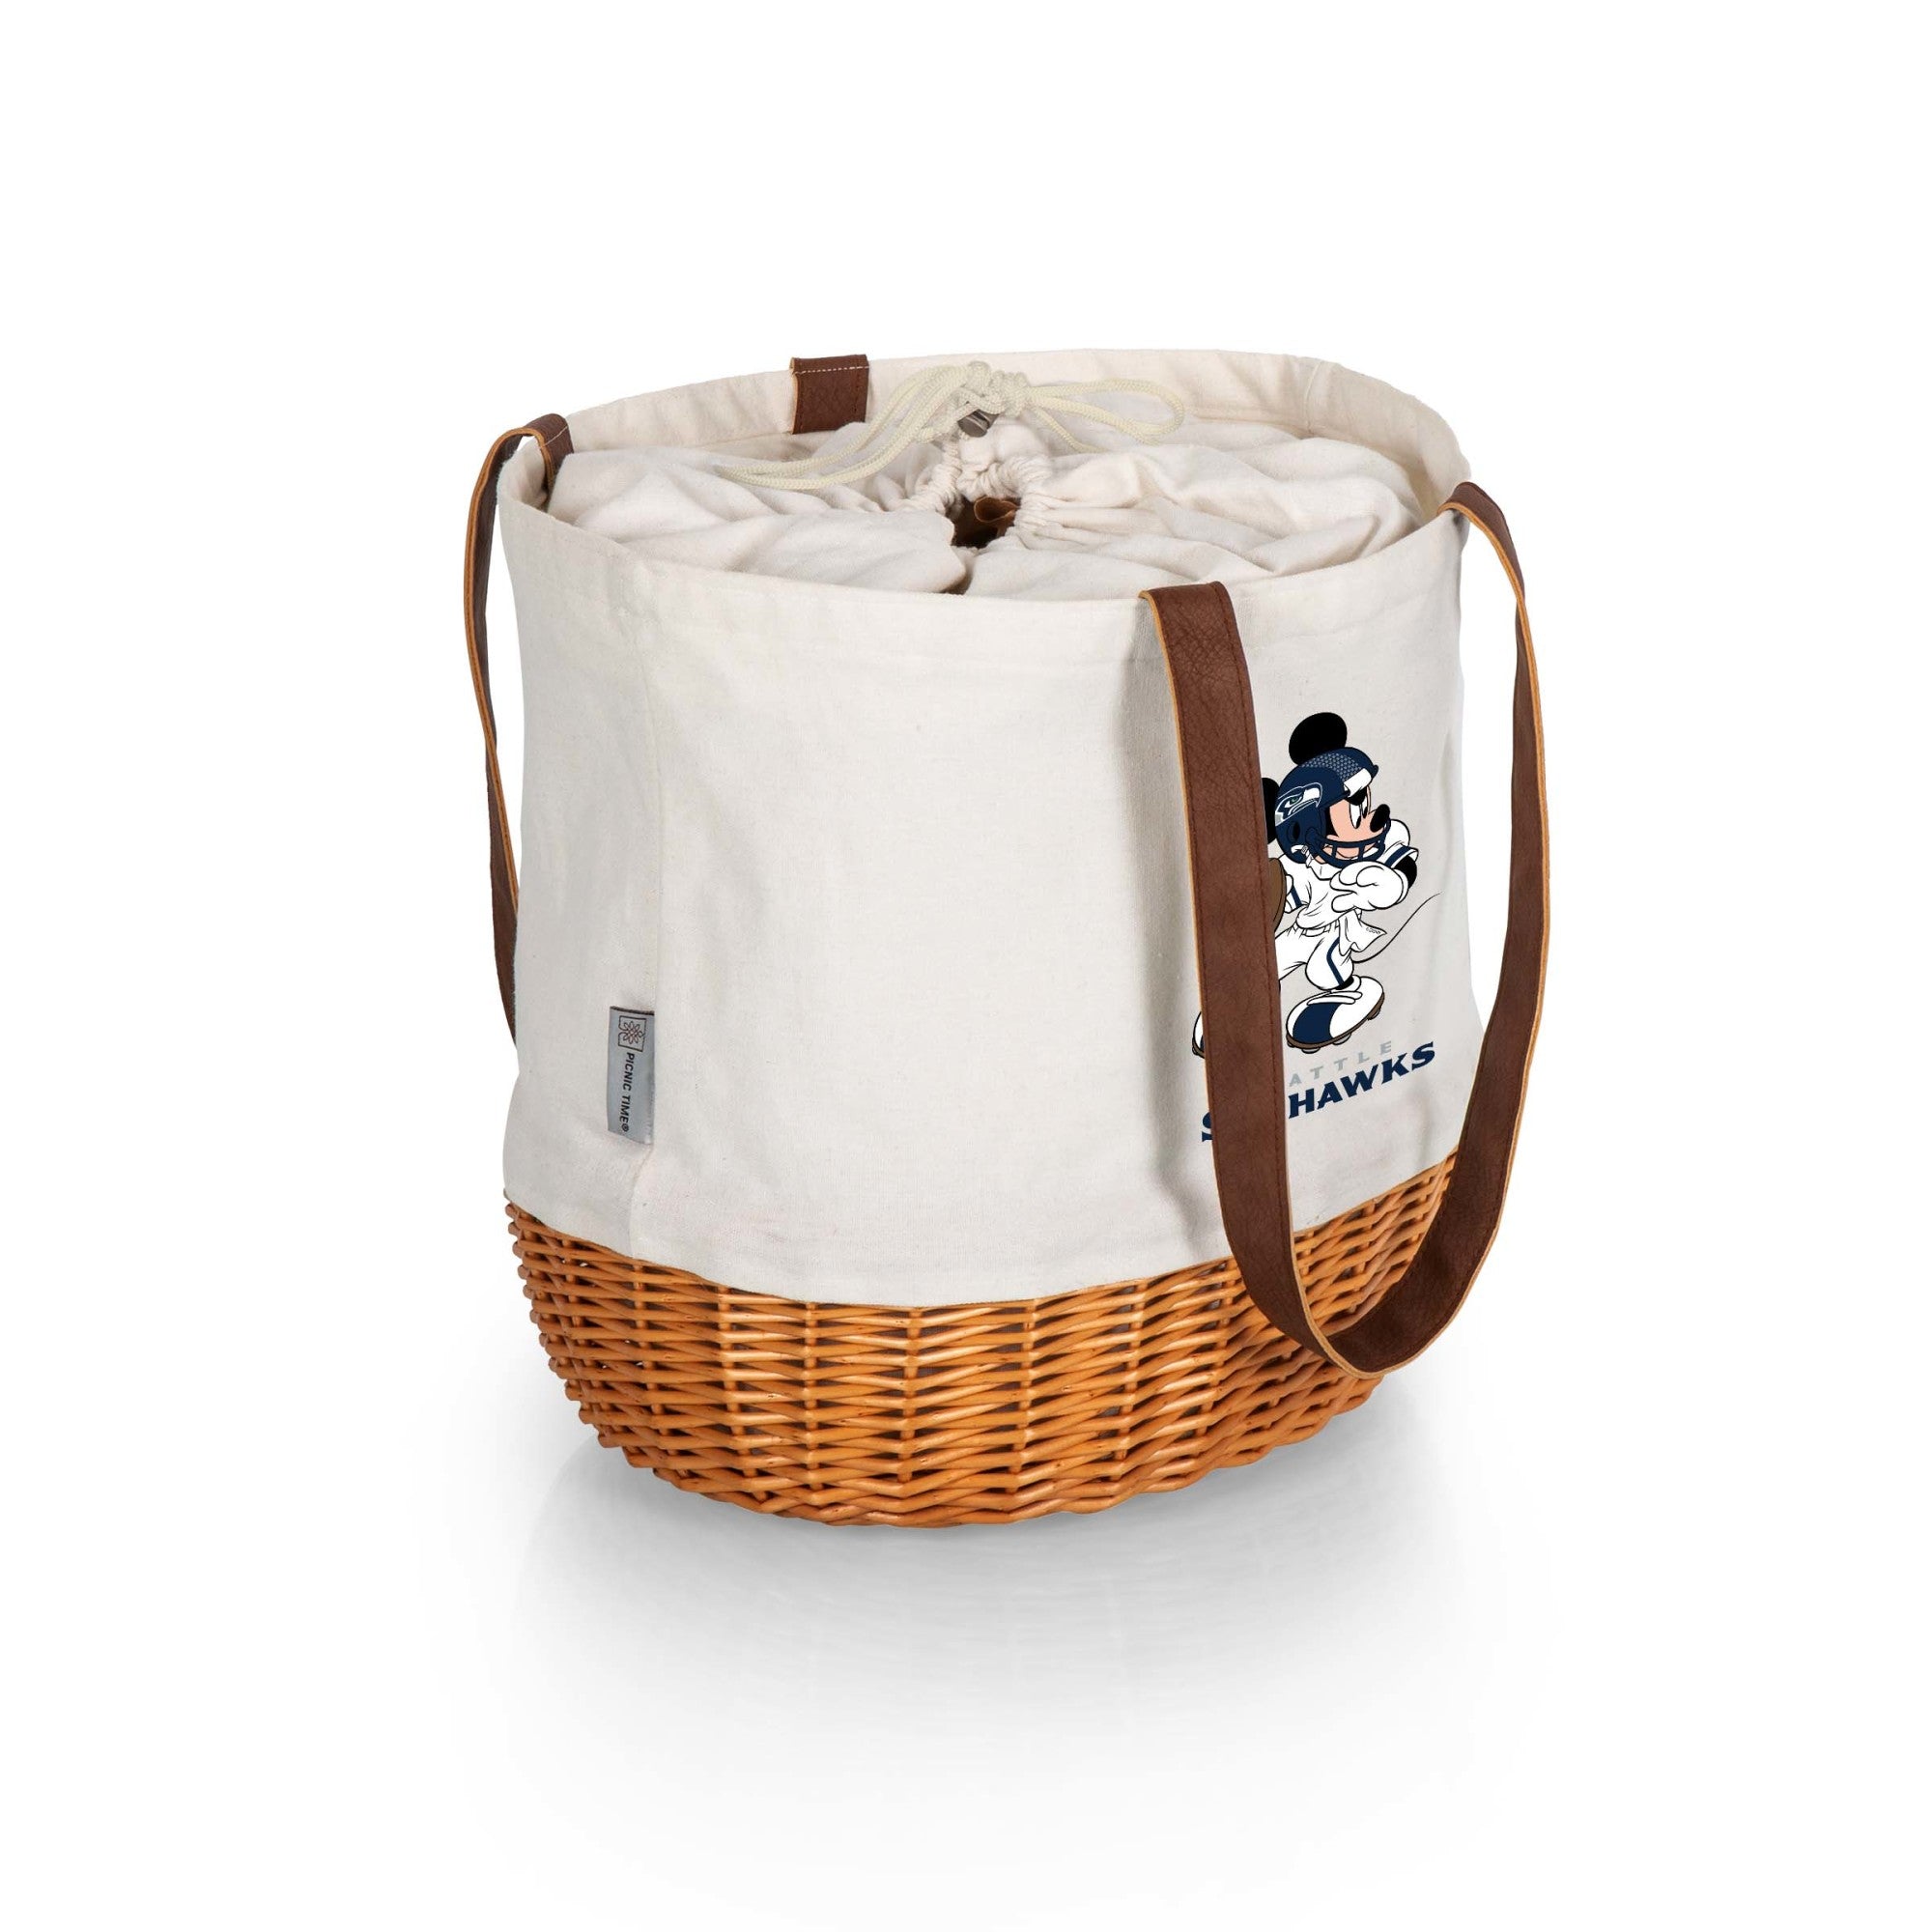 Mickey Mouse - Seattle Seahawks - Coronado Canvas and Willow Basket Tote